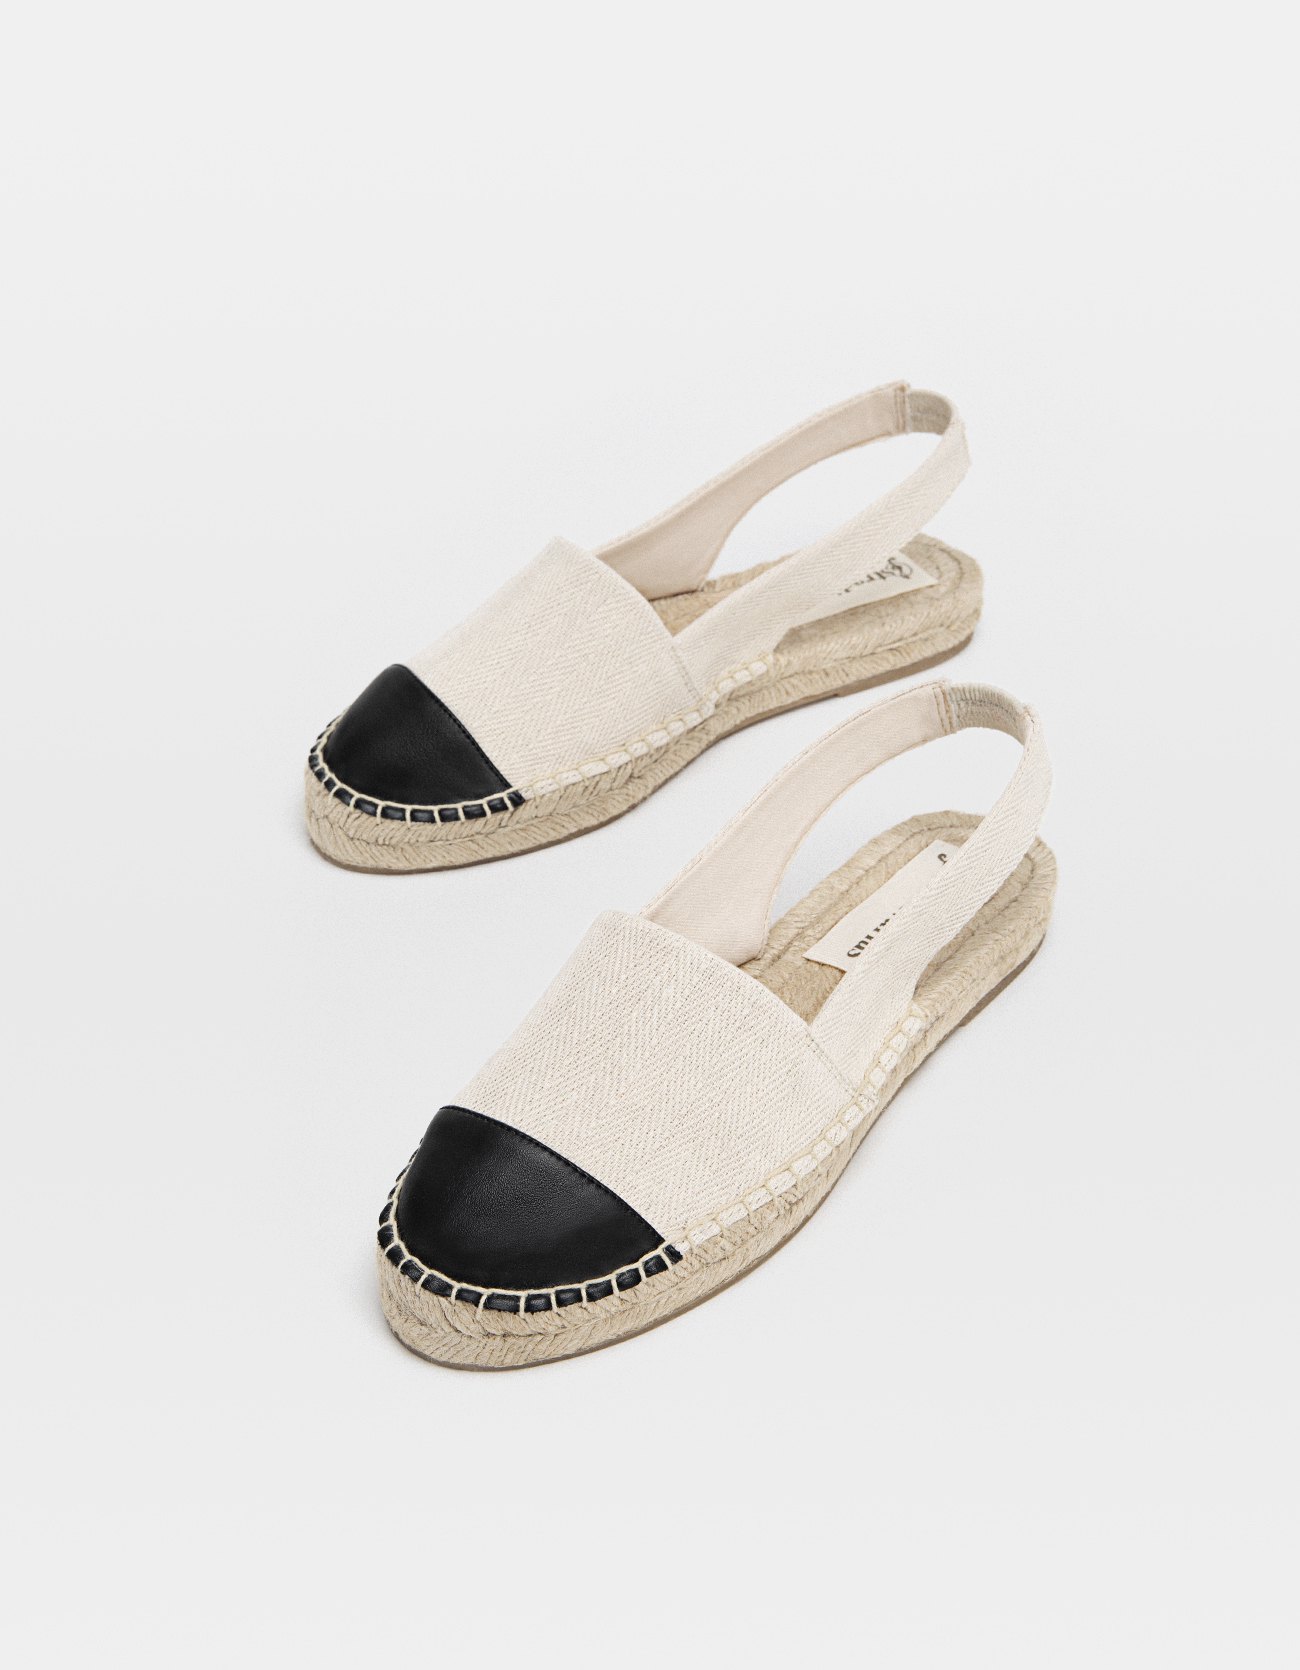 Slingback espadrilles with contrasting toe